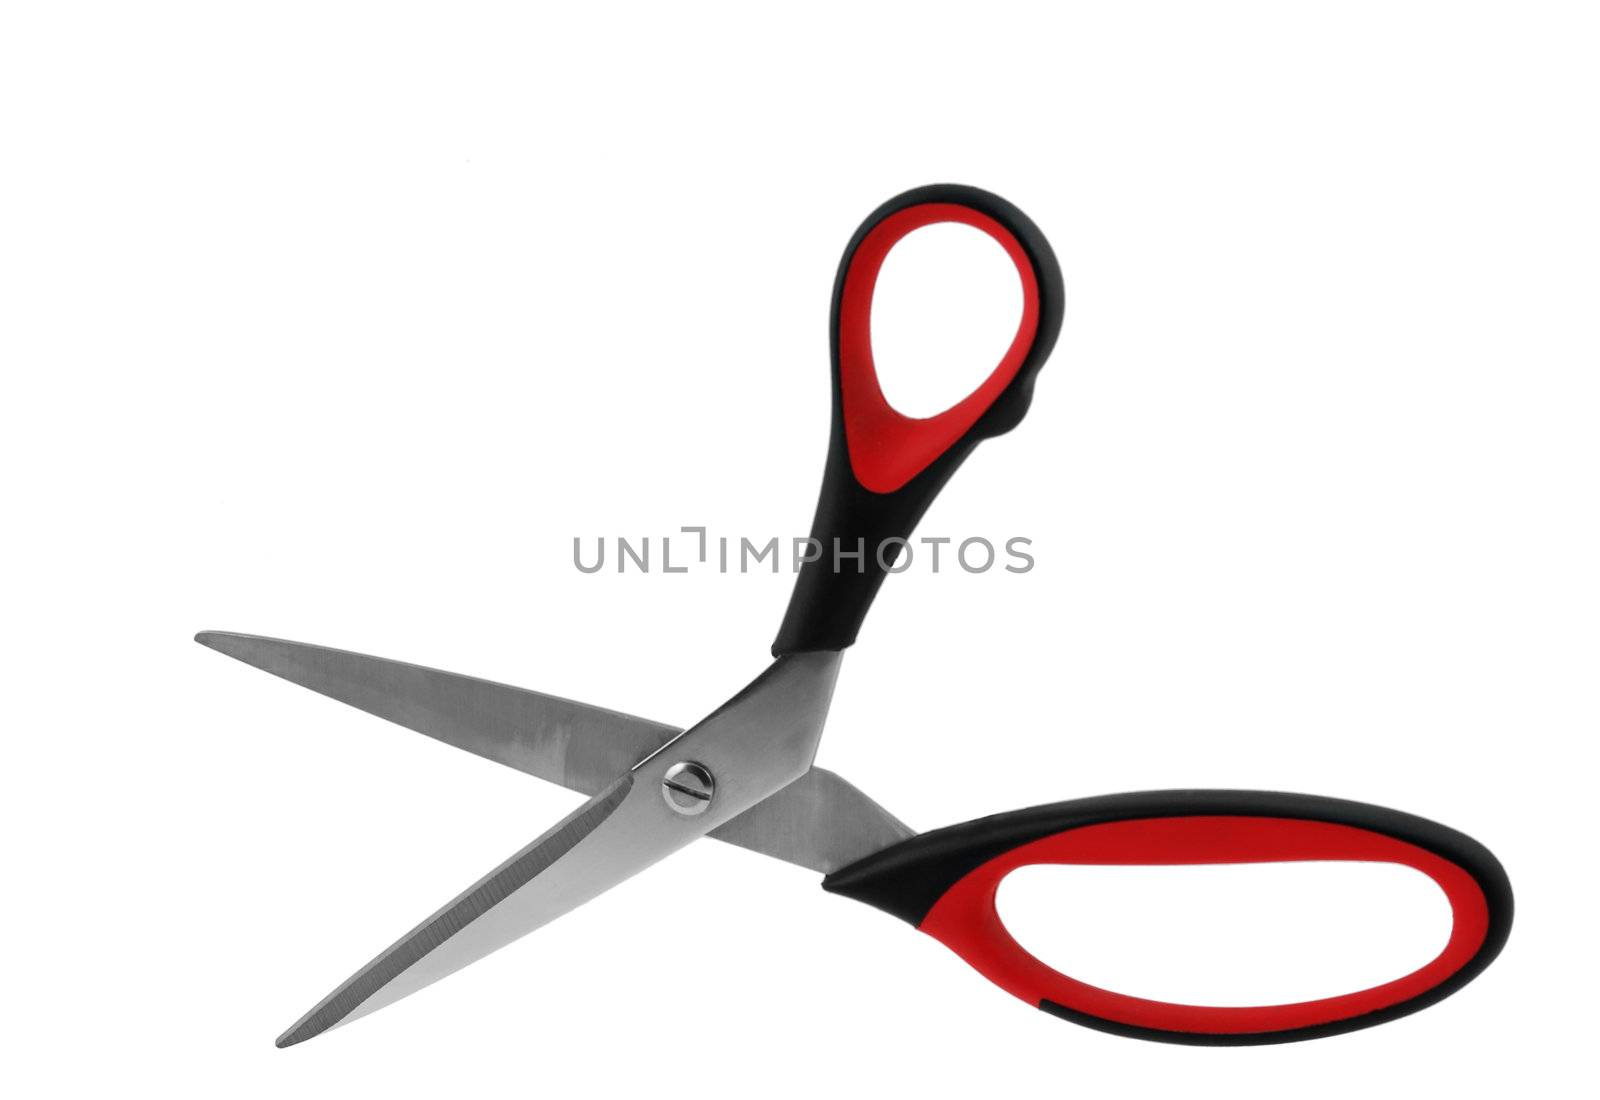 Scissors. It is red black color scale, it is isolated on a white background